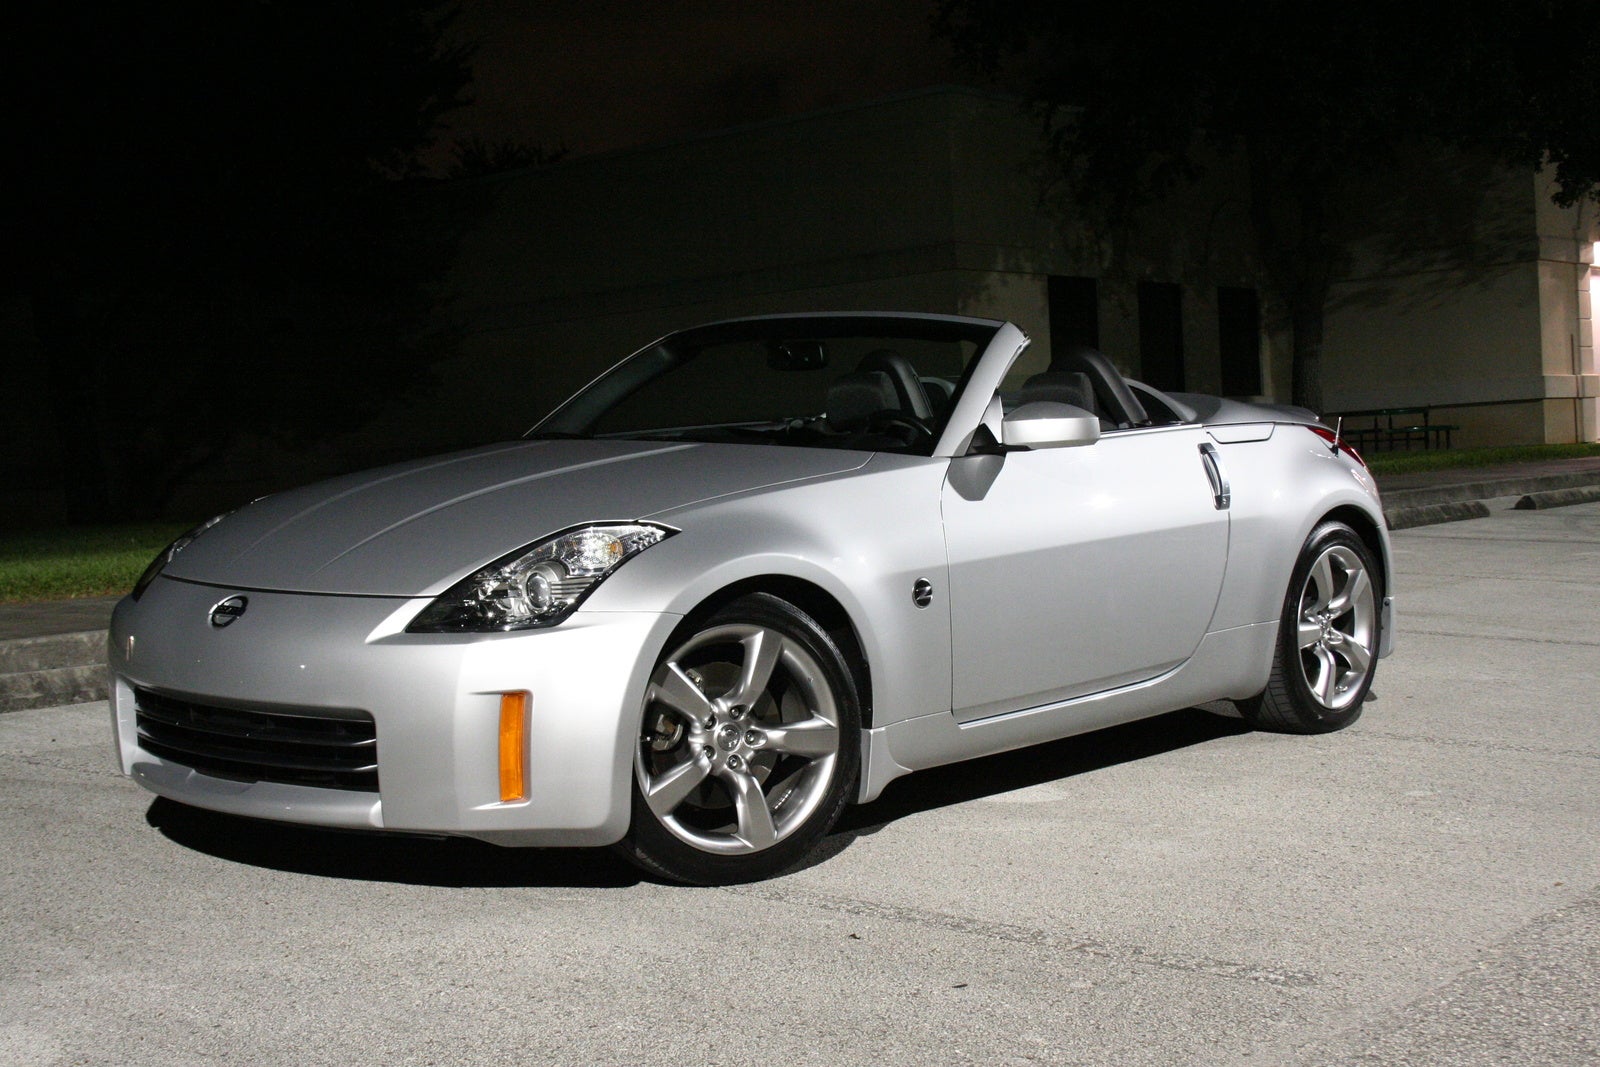 2006 Nissan 350z enthusiast roadster #4